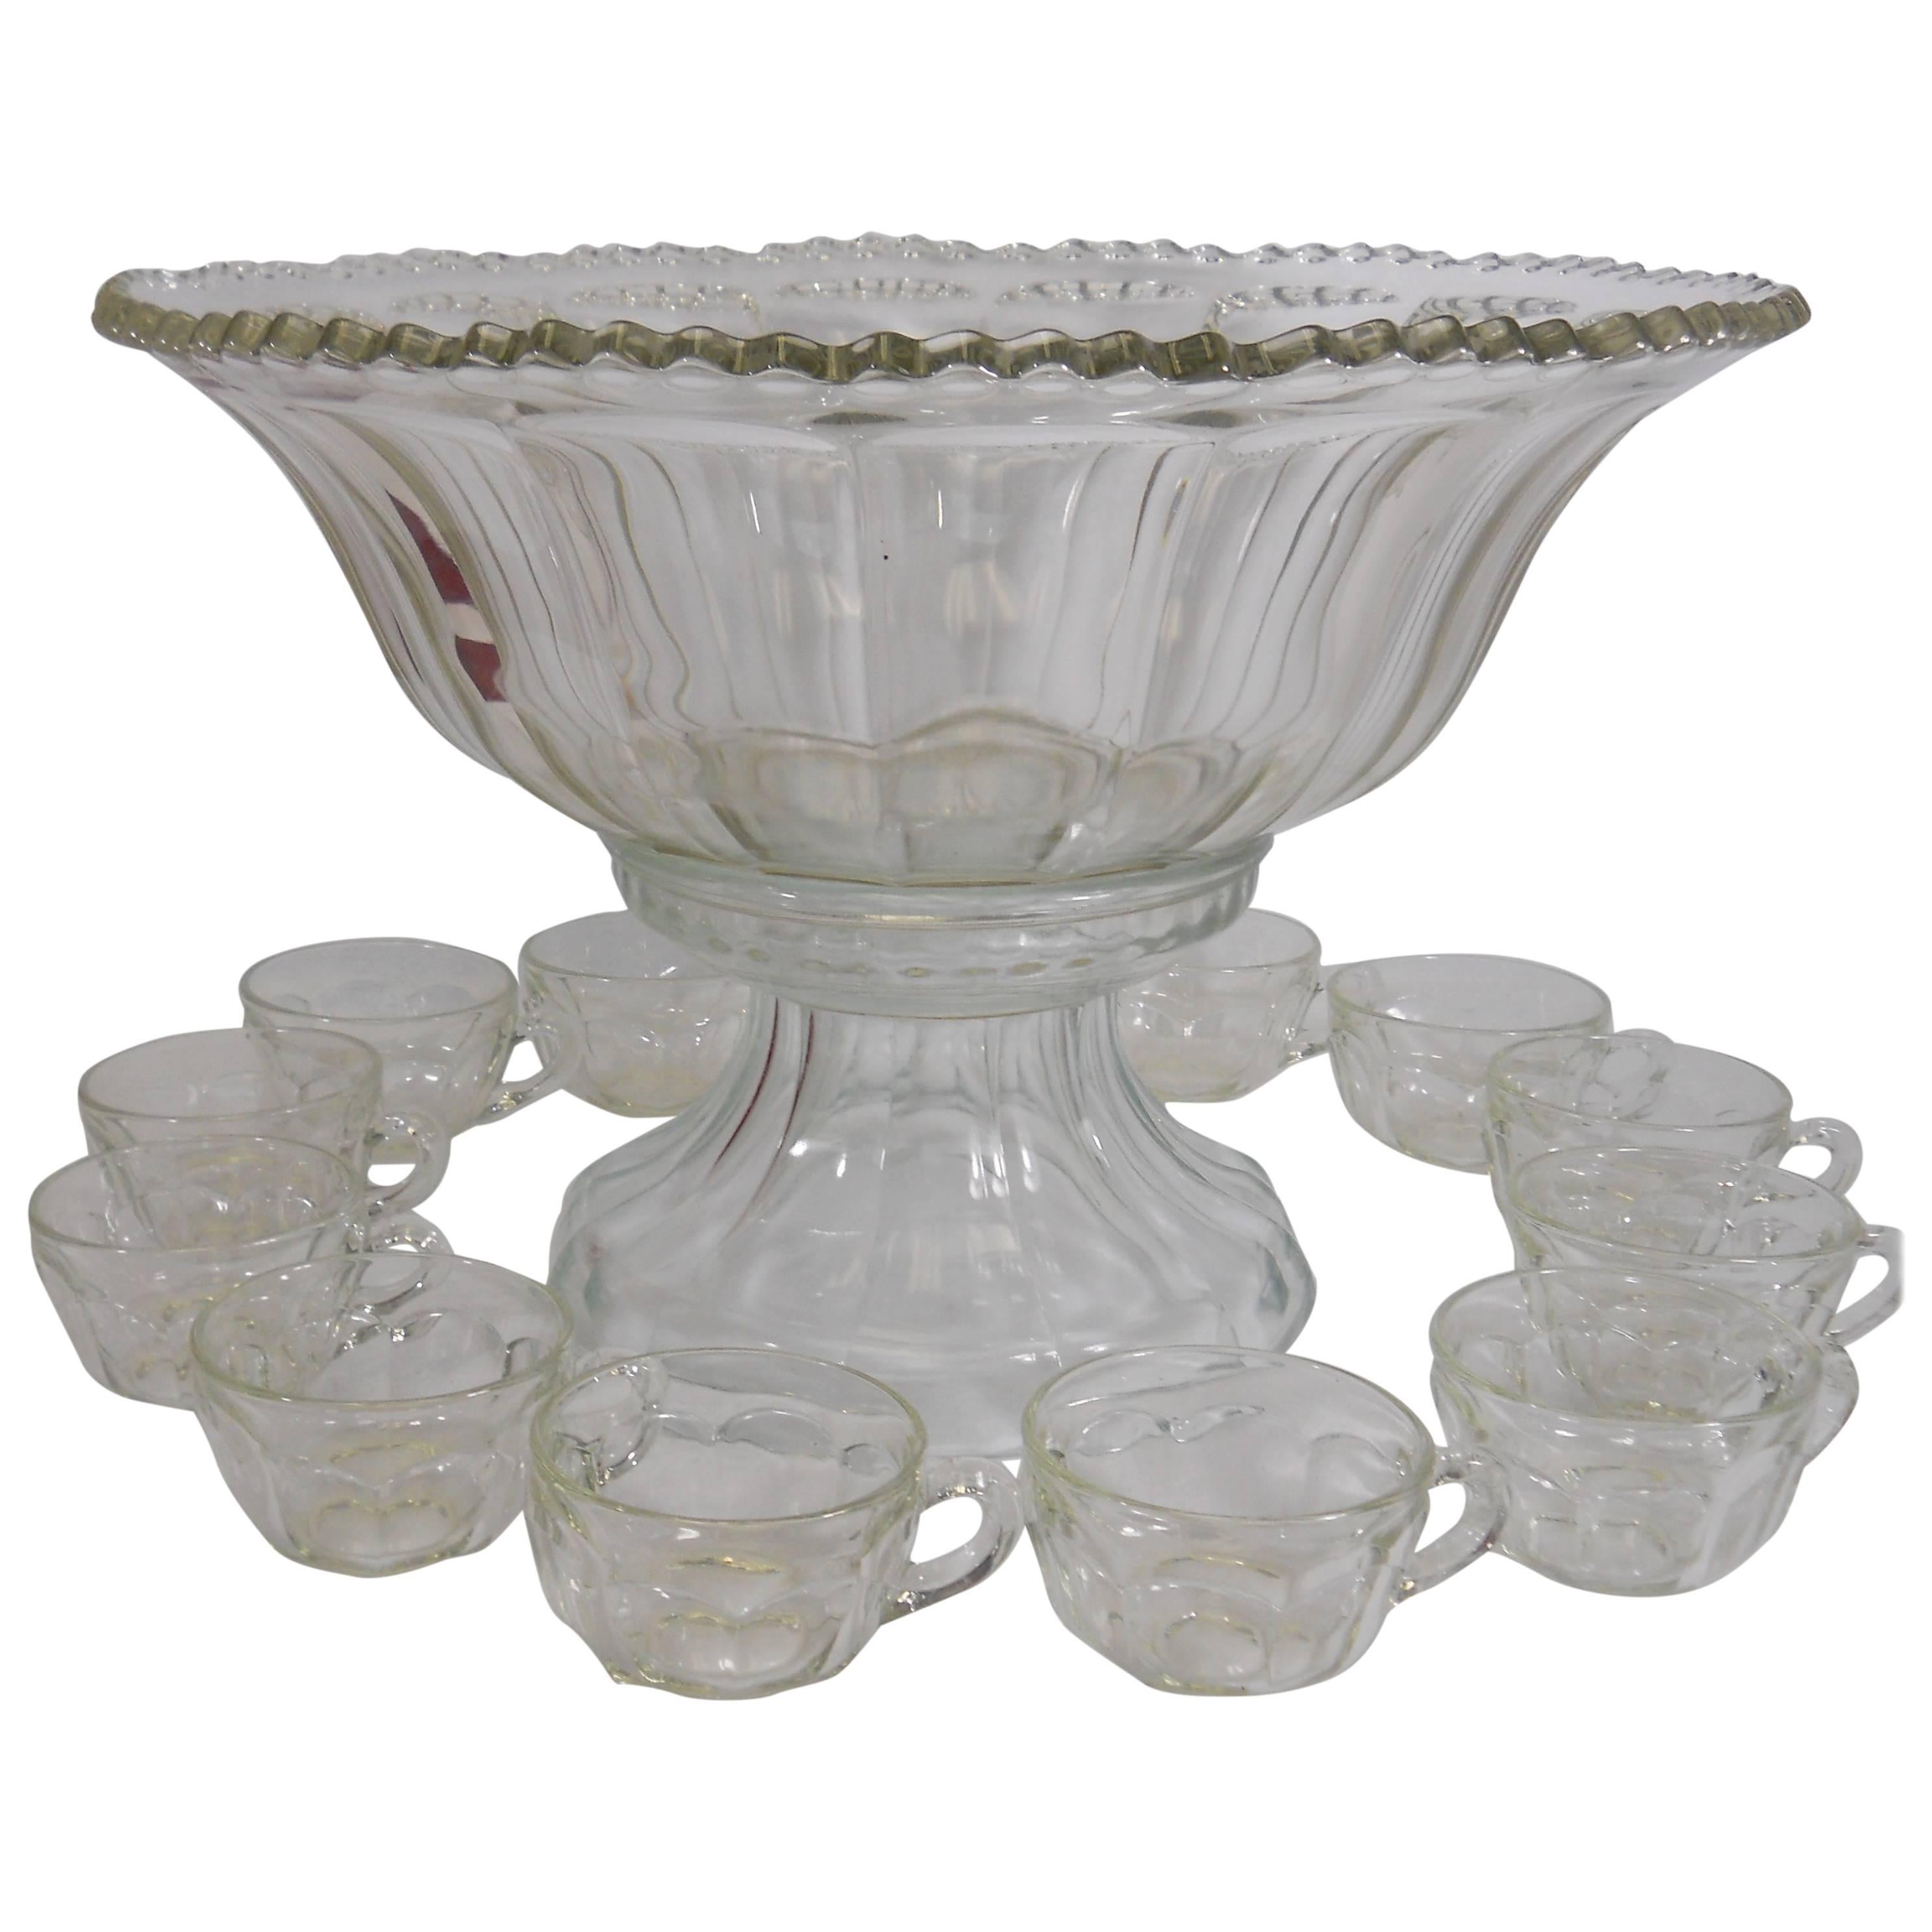 1962 Indiana Glass Co. Colonial Paneled PUNCH BOWL SET w/Scalloped Rim #7115 For Sale